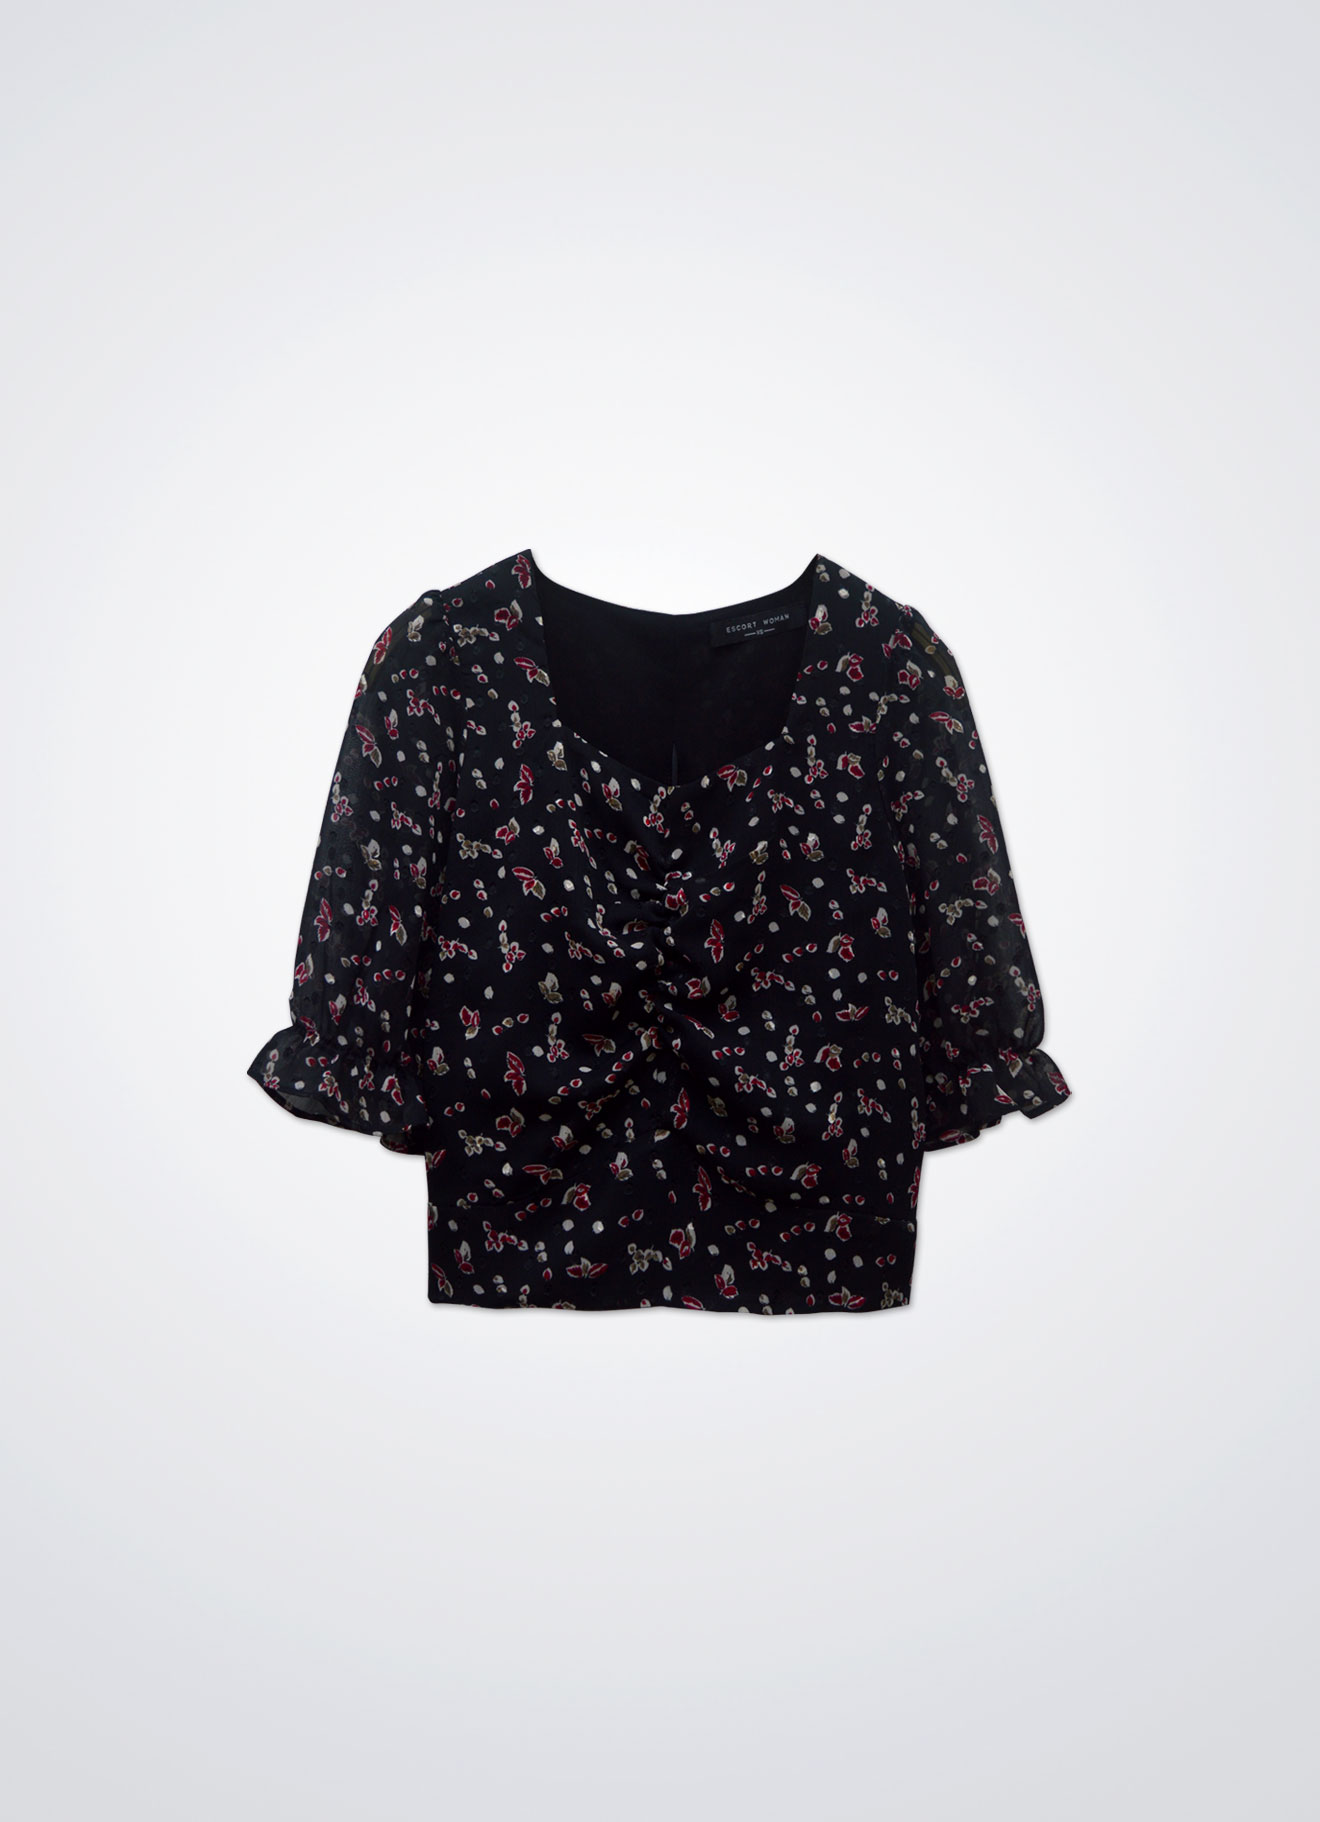 Baked-Apple by Floral Printed Blouse